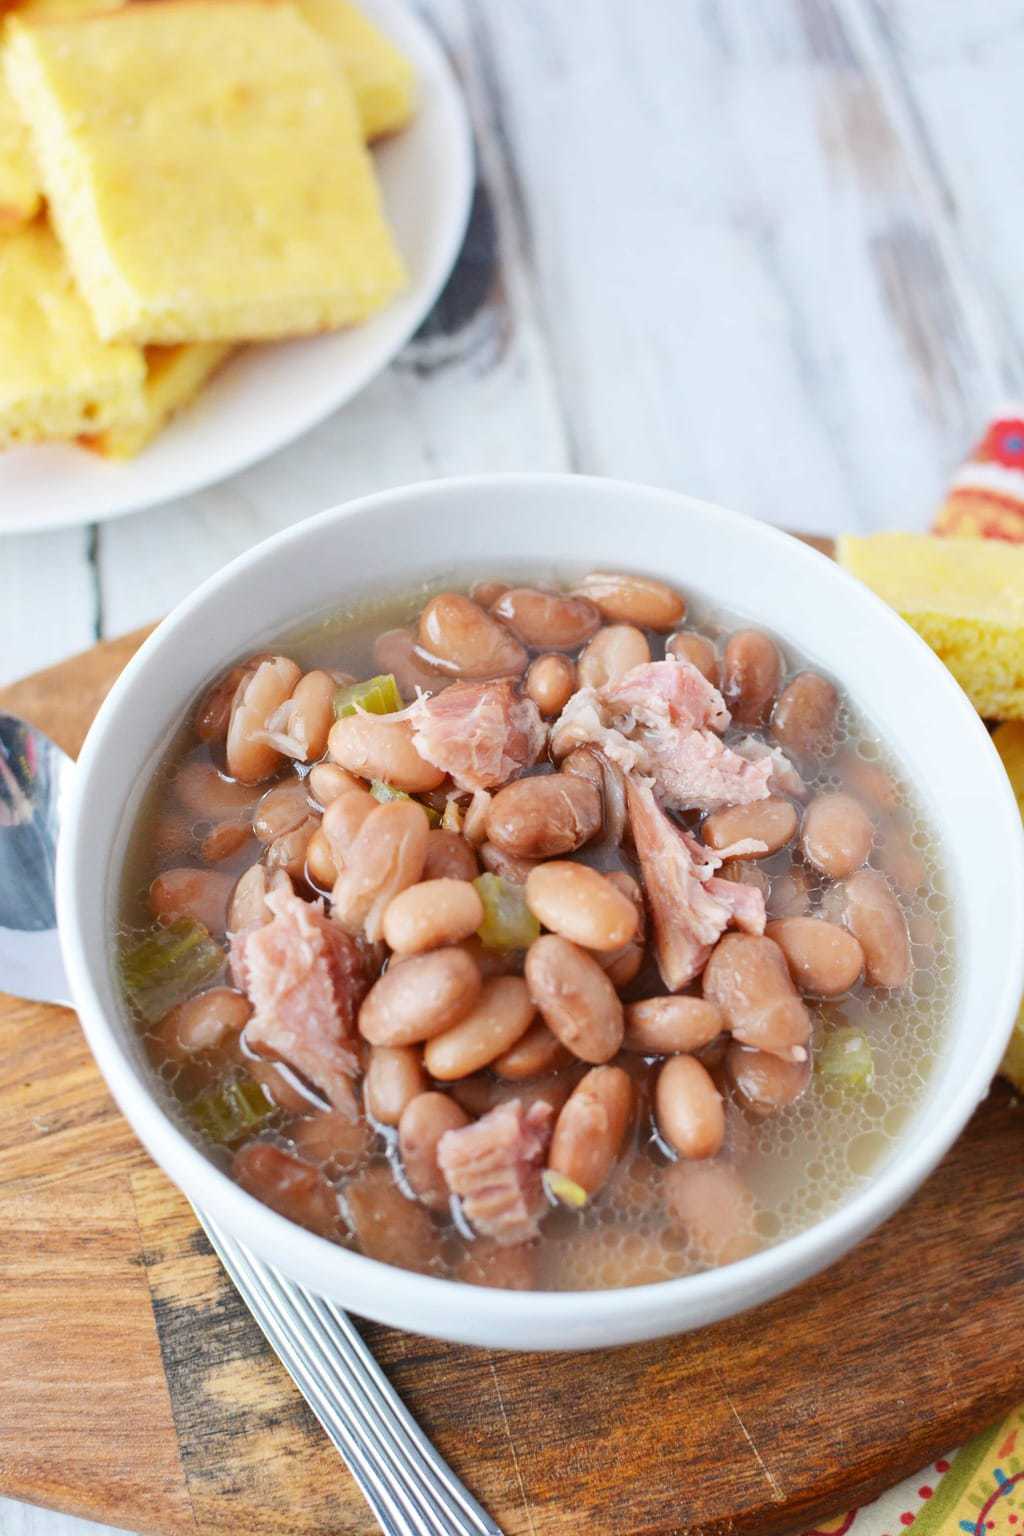 Slow Cooker Pinto Beans With Ham Bone - A Southern Favorite Recipe